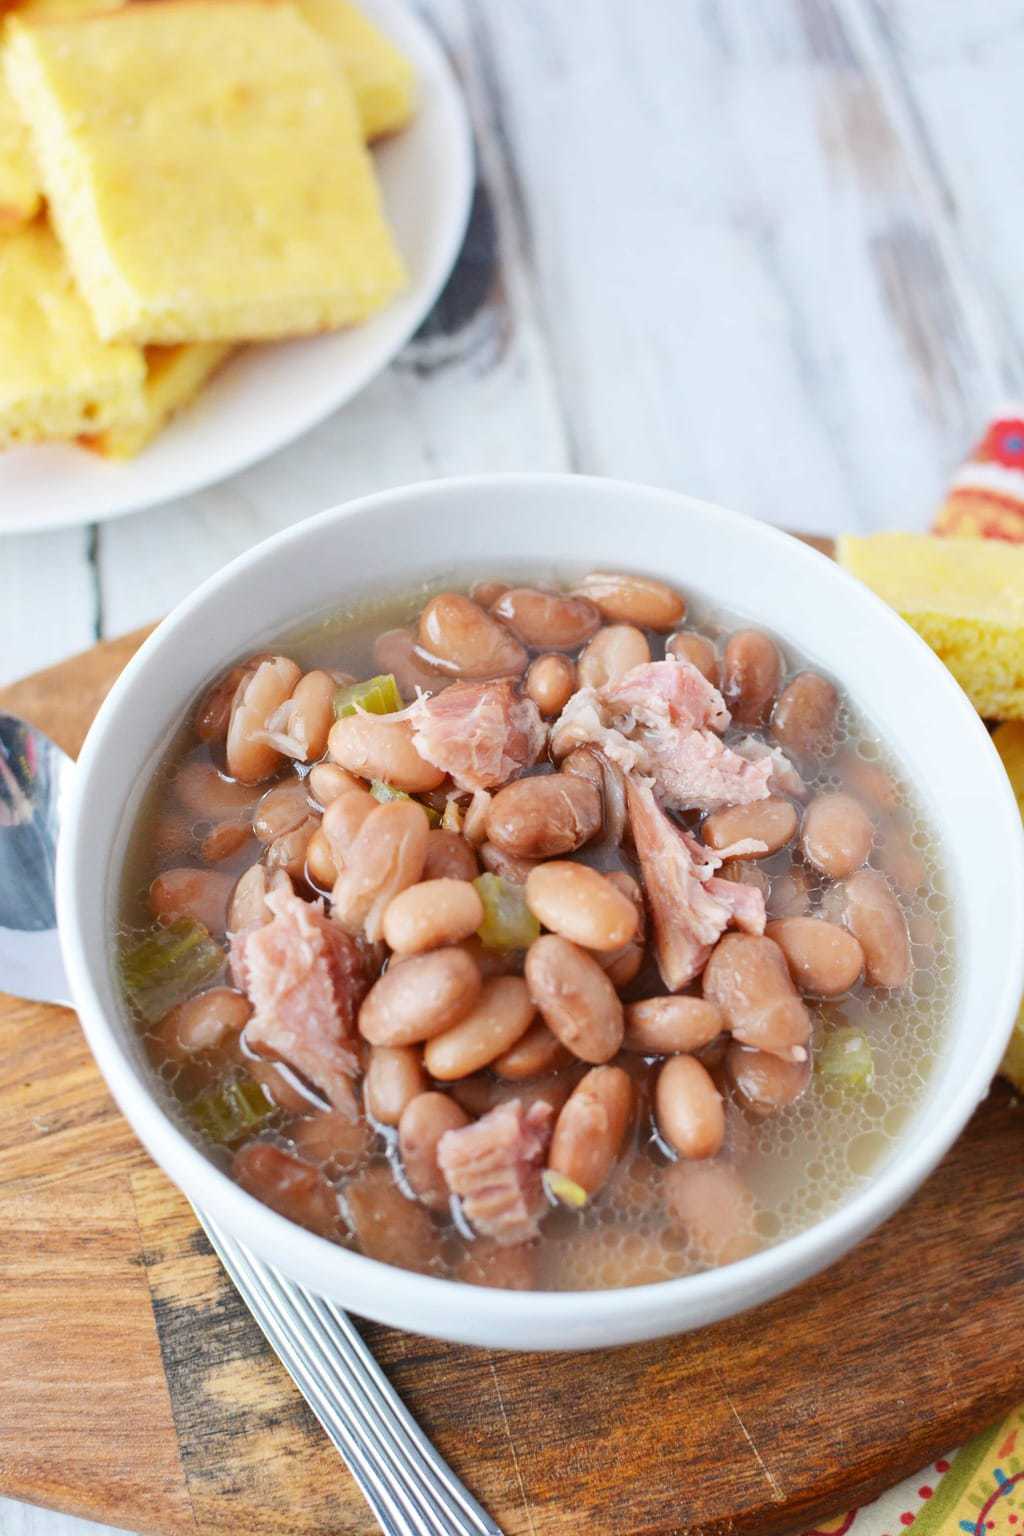 Slow Cooker Pinto Beans With Ham Bone - A Southern Favorite Recipe